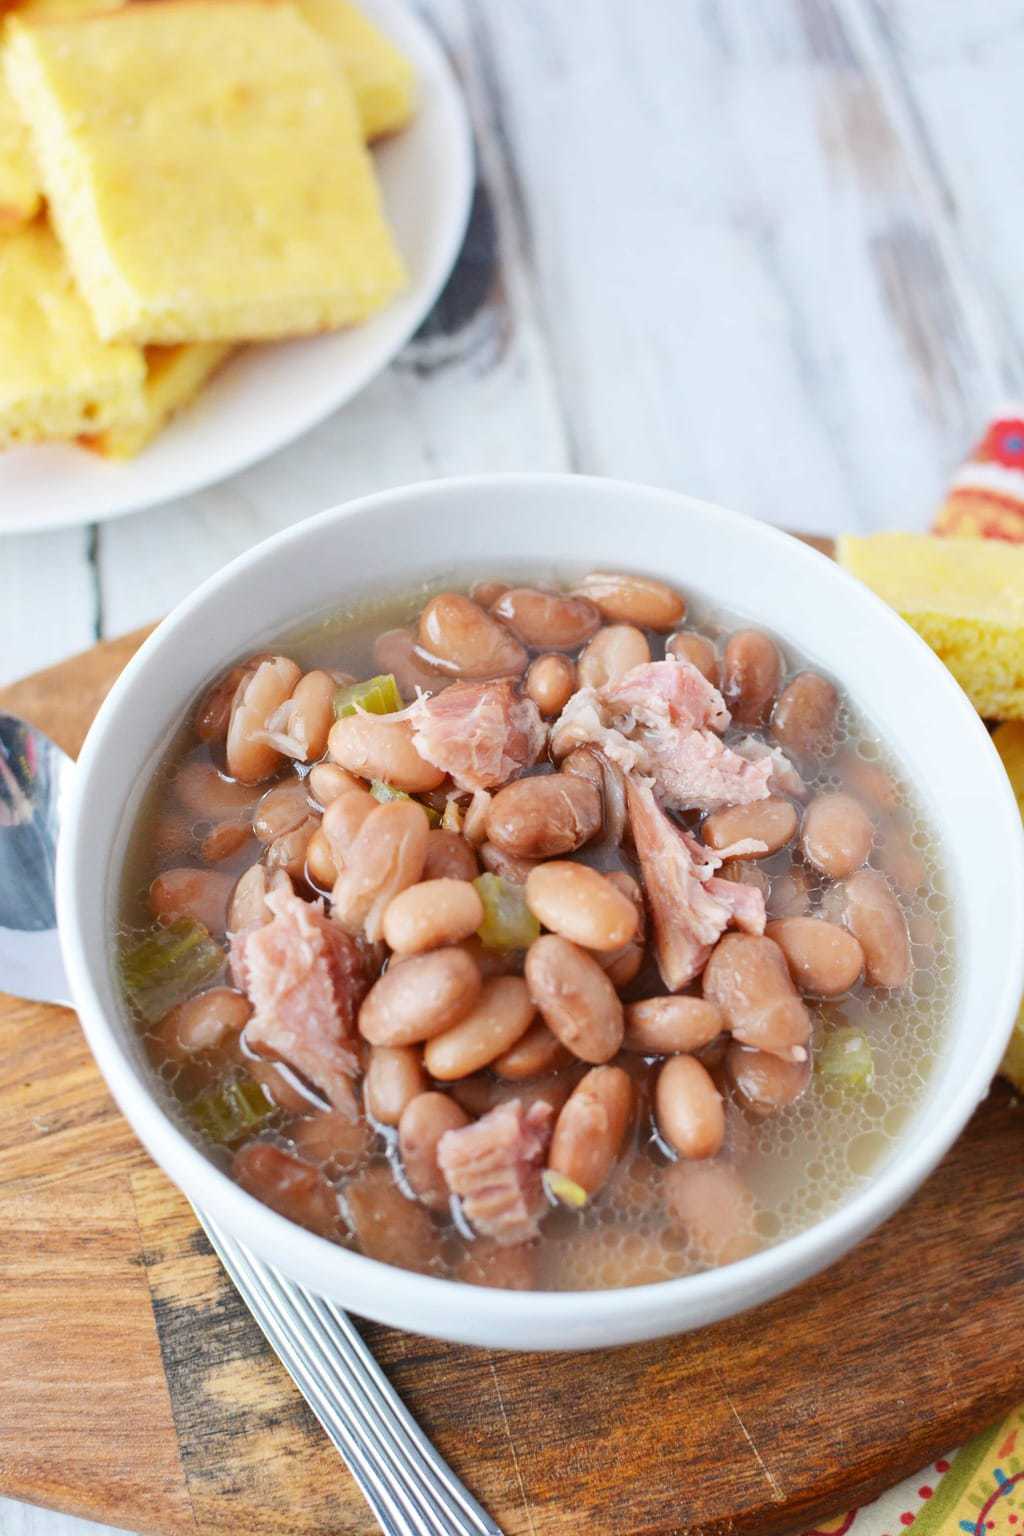 Slow Cooker Pinto Beans With Ham Bone - A Southern Favorite Recipe